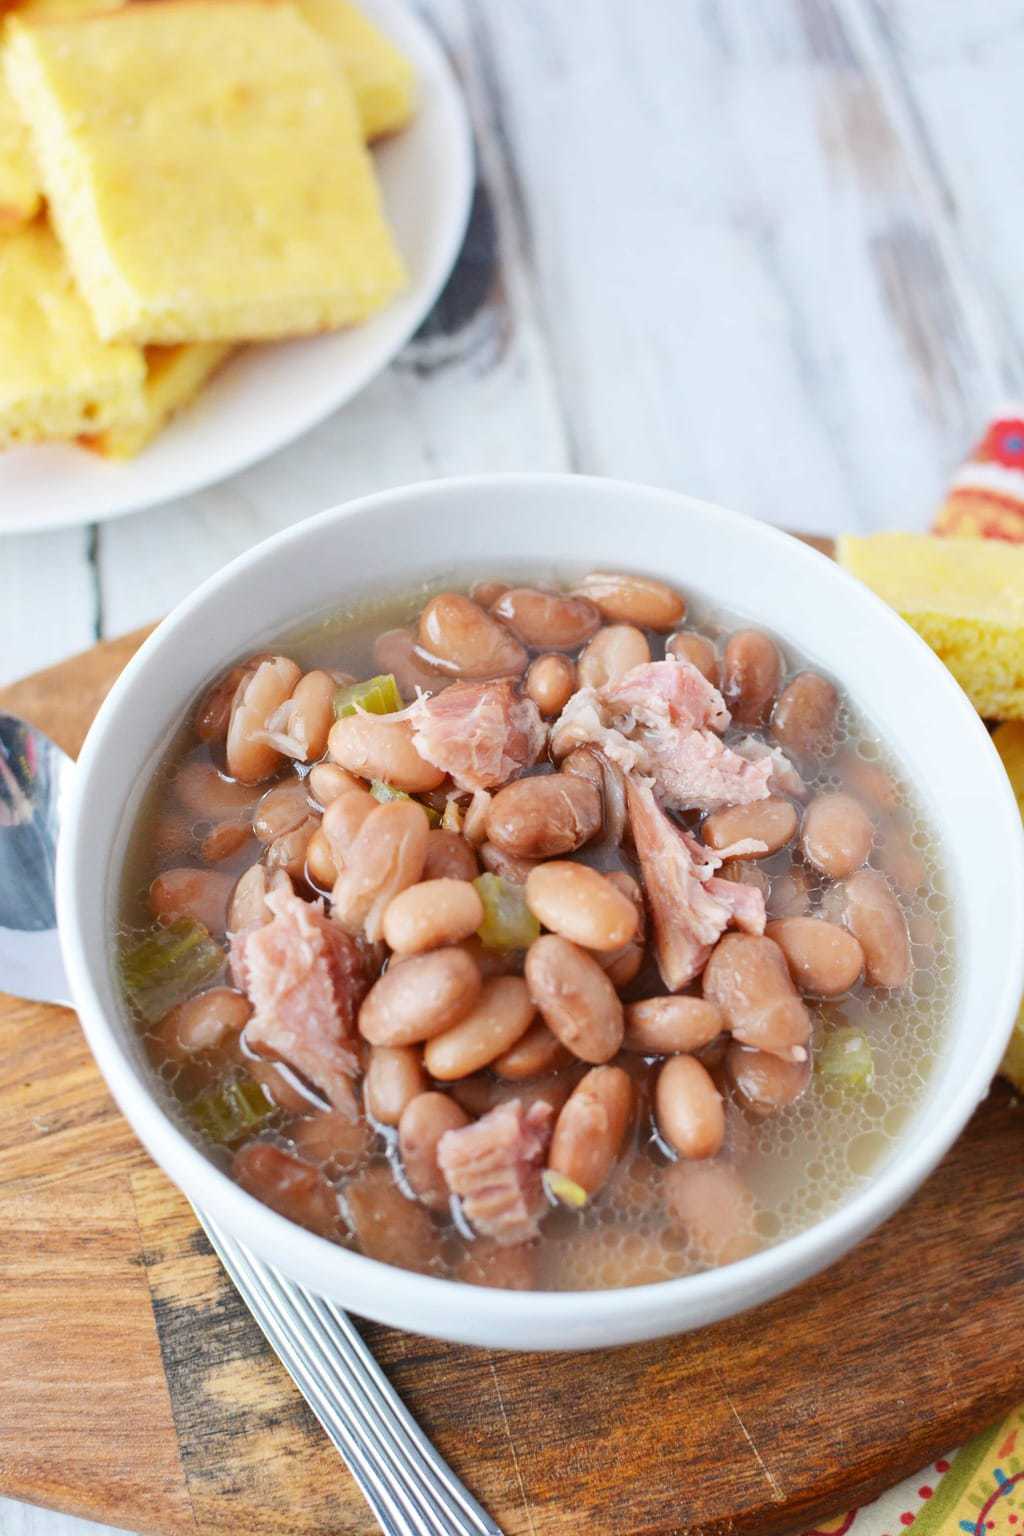 Slow Cooker Pinto Beans With Ham Bone - A Southern Favorite Recipe